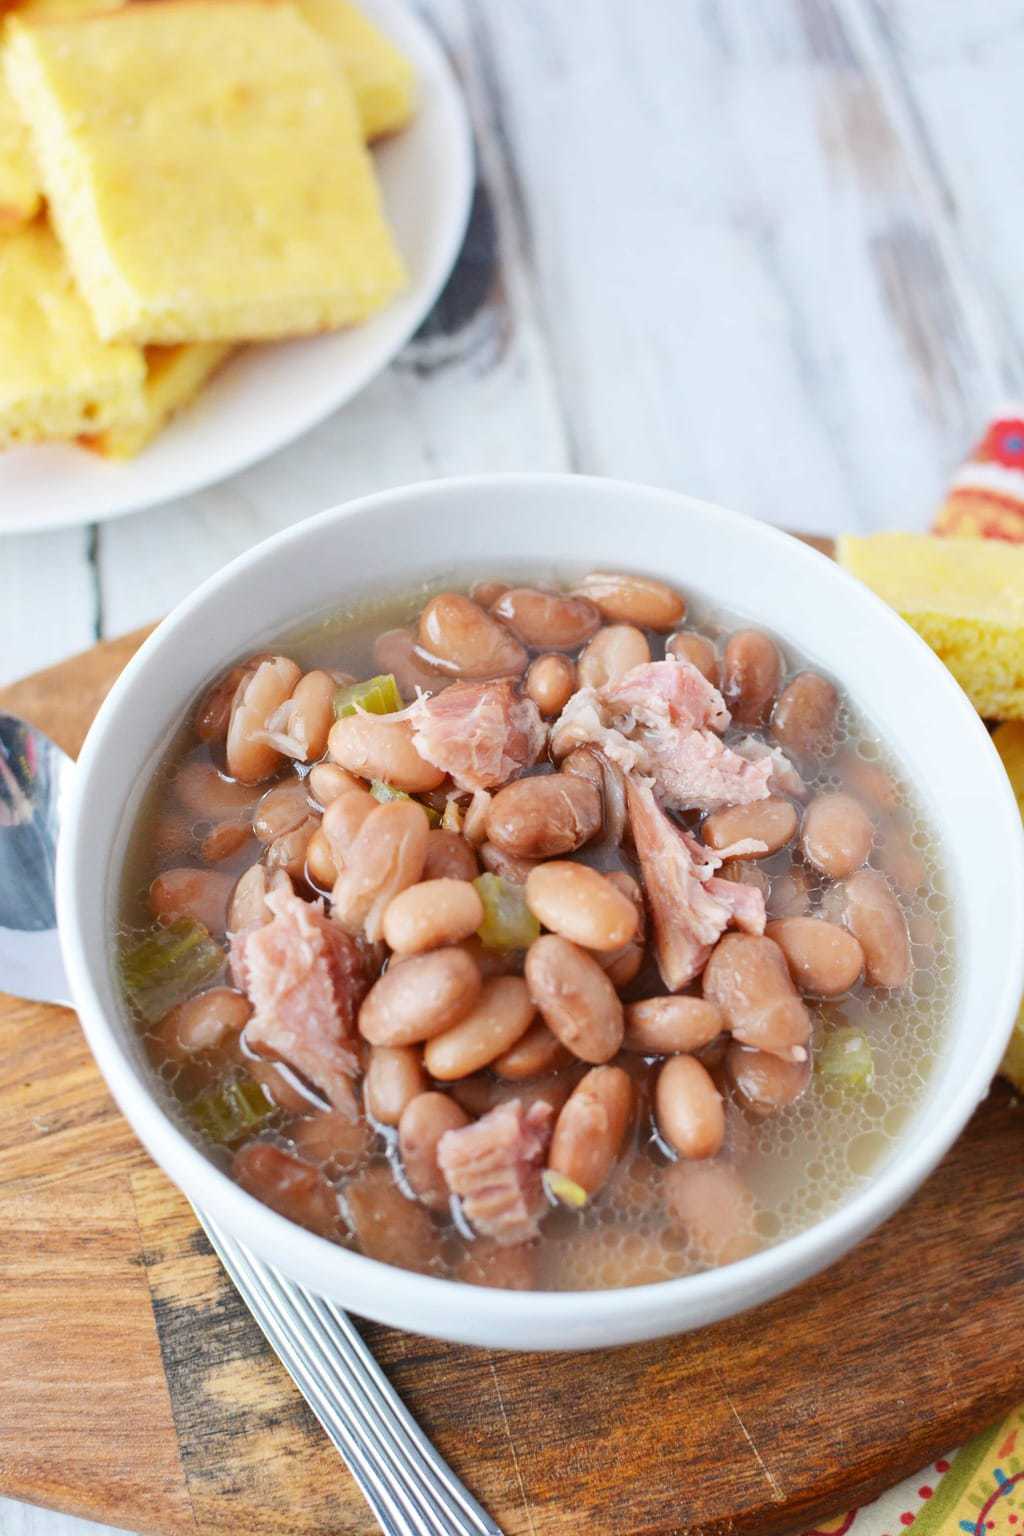 Slow Cooker Pinto Beans With Ham Bone - A Southern Favorite Recipe